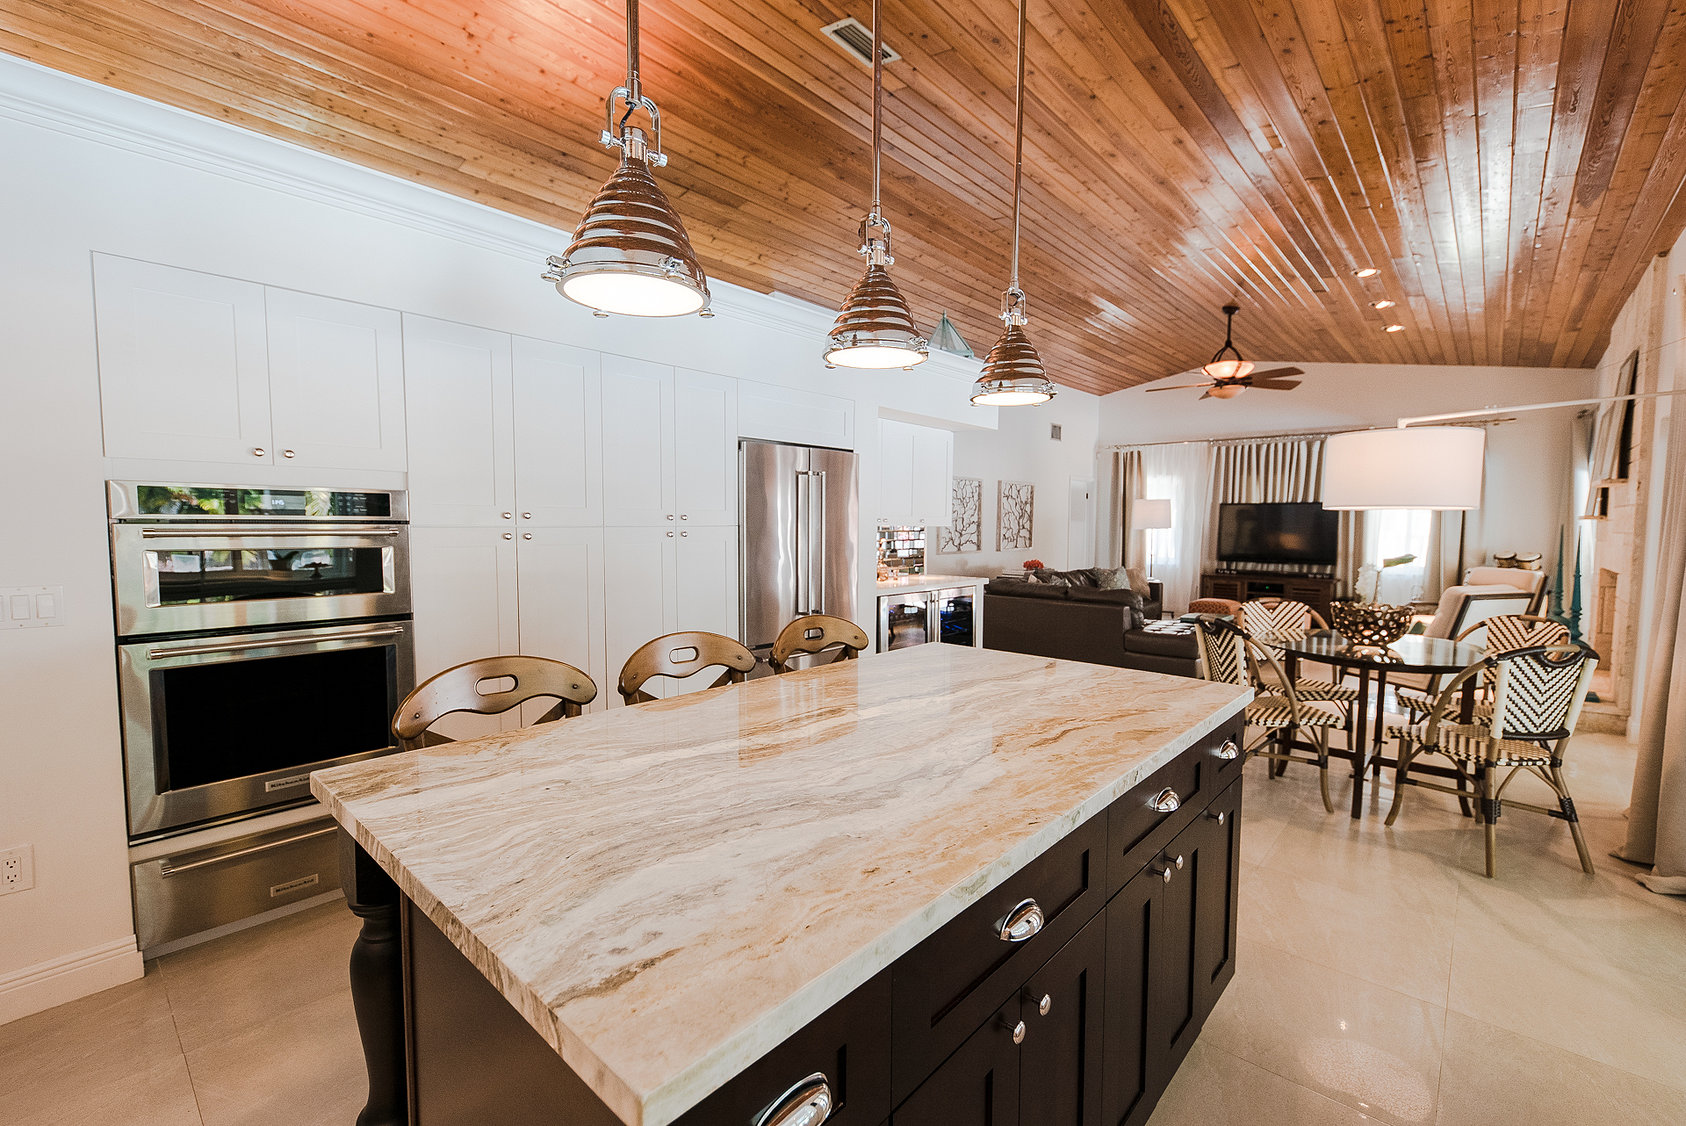 Inside the kitchen of a home for sale in Palmetto Bay